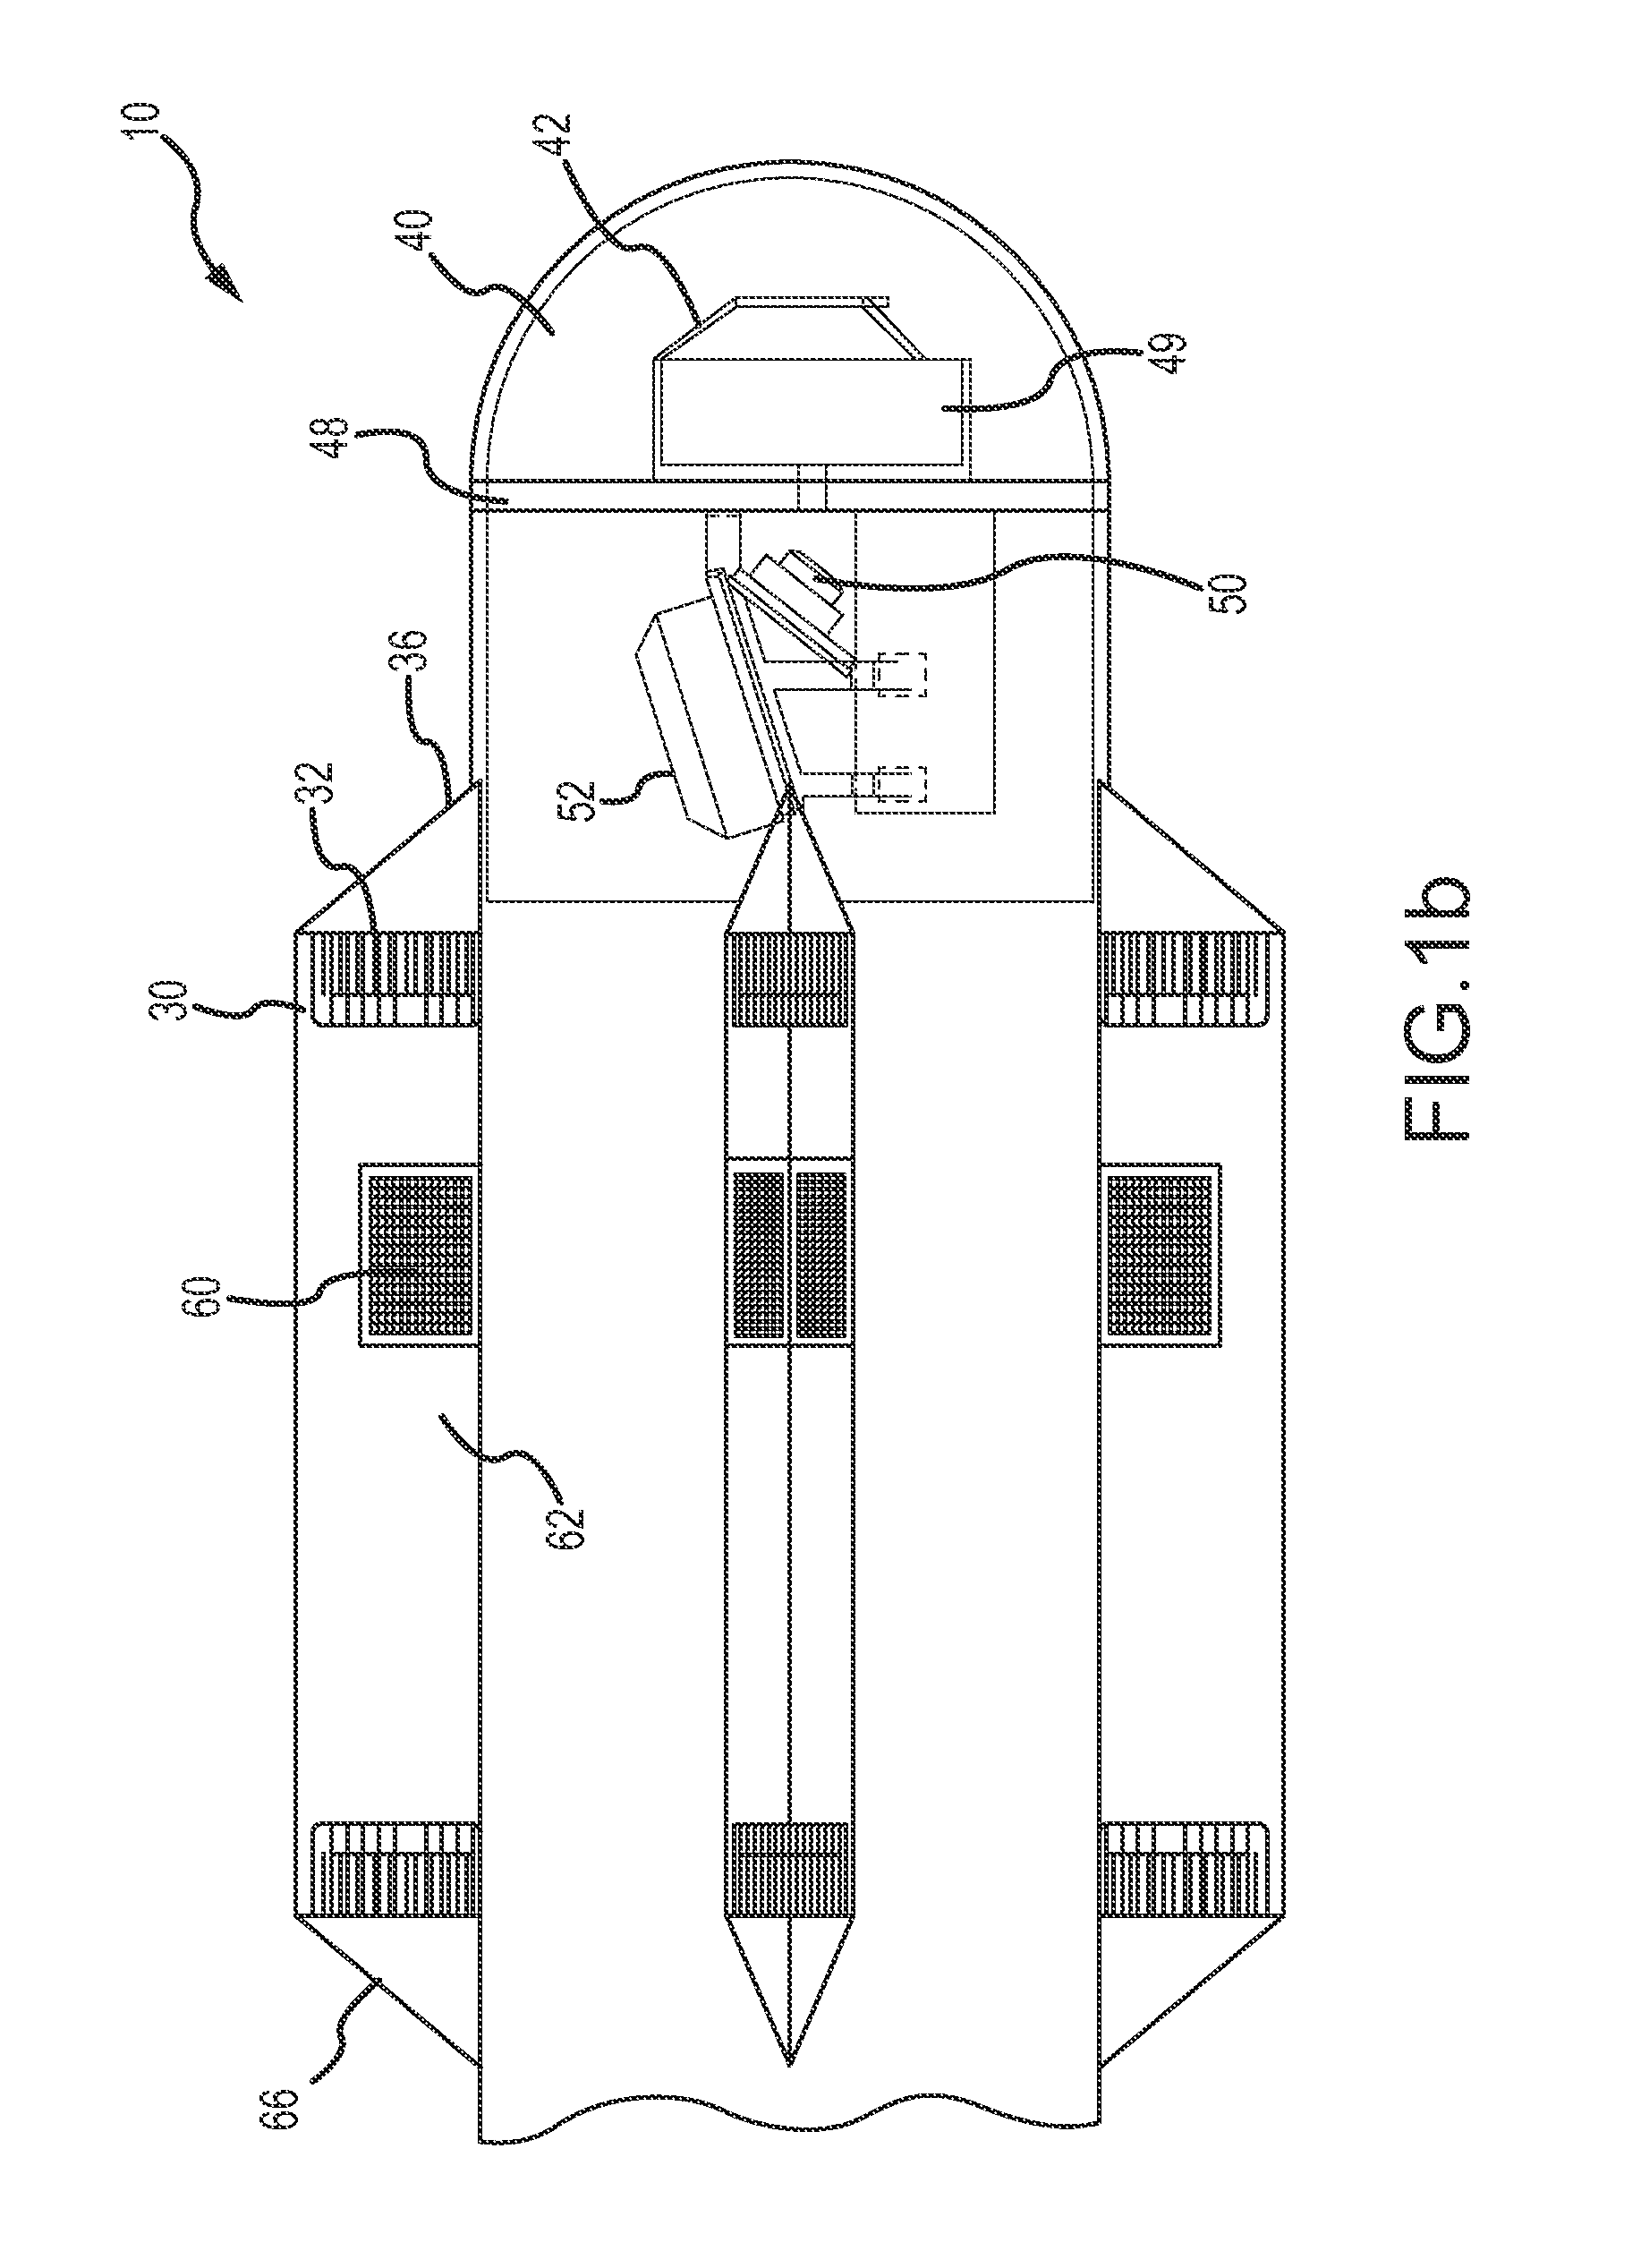 Adaptive electronically steerable array (AESA) system for interceptor RF target engagement and communications